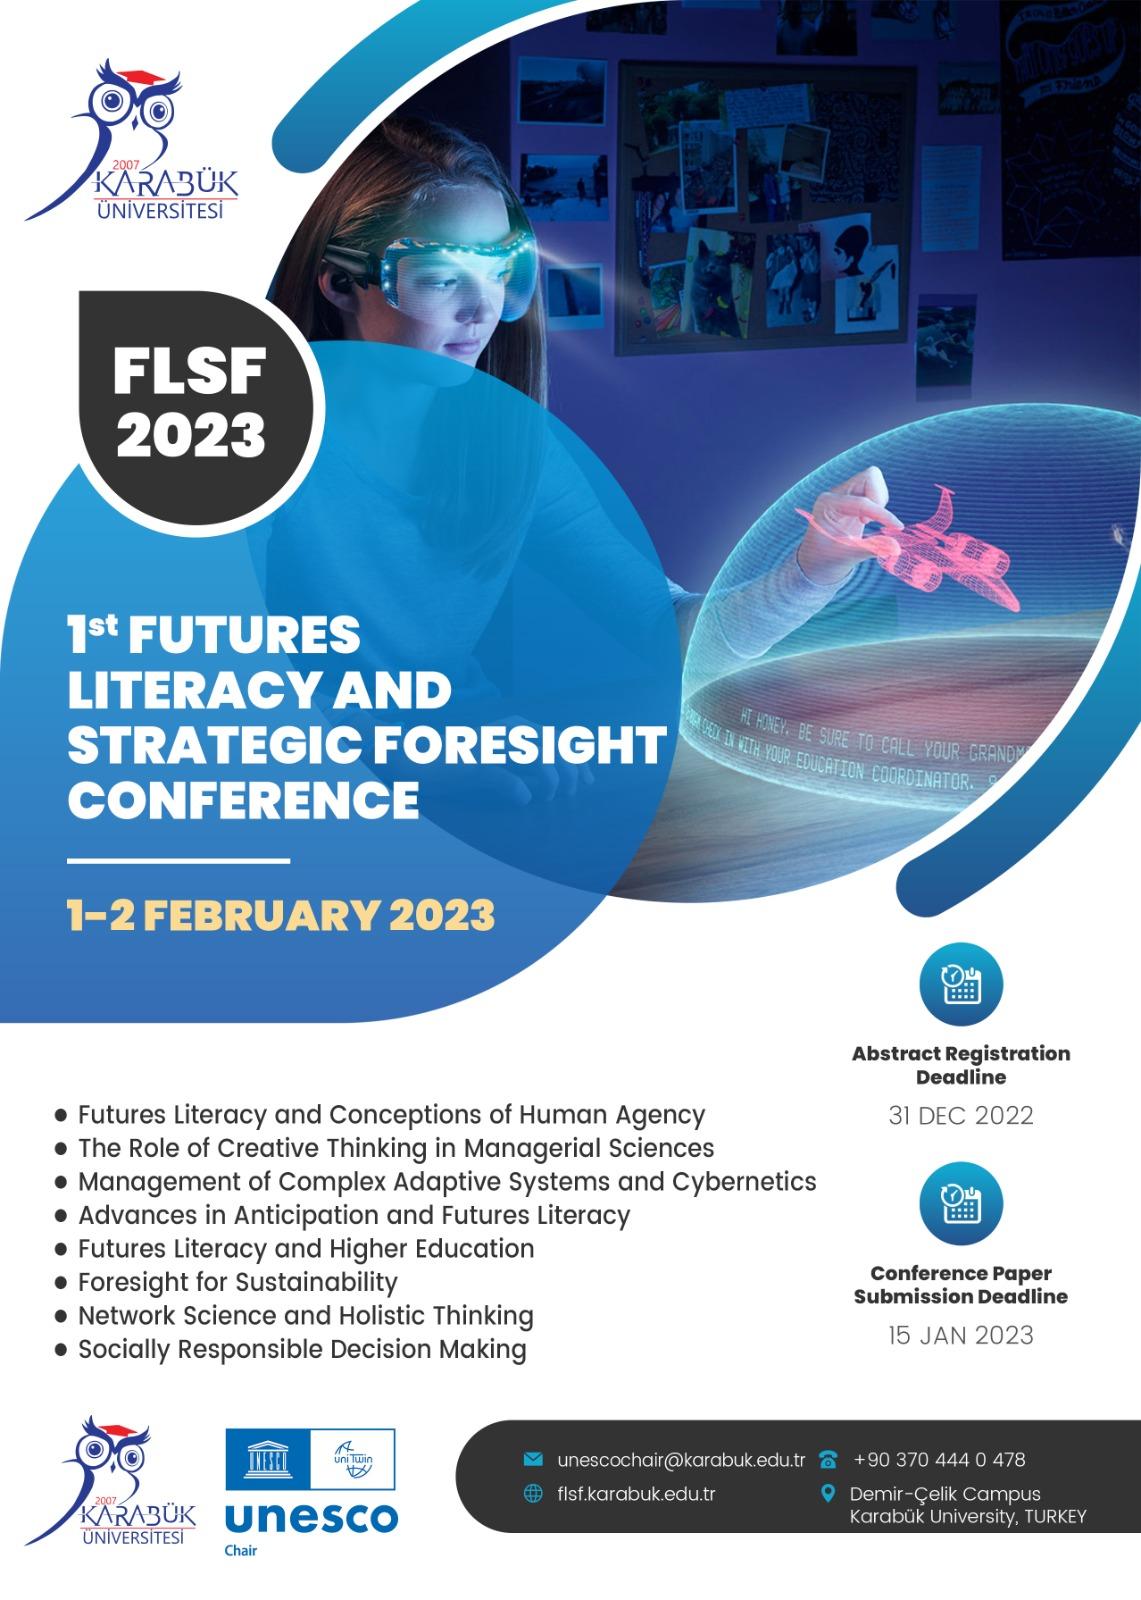 Konferencja -   FLSF 2023 - 1st Futures Literacy and Strategic Foresight Conference